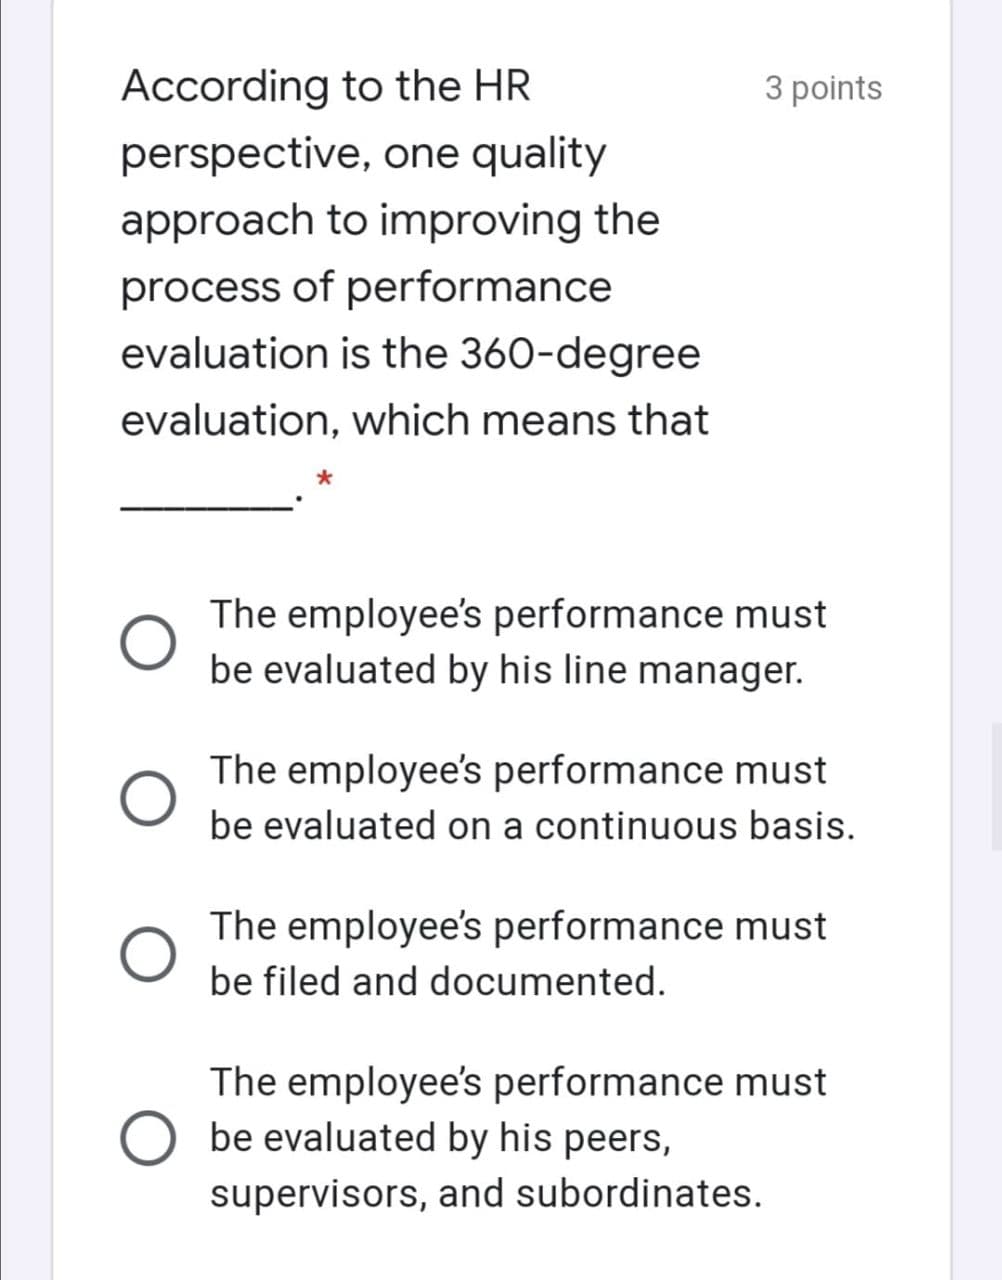 According to the HR
3 points
perspective, one quality
approach to improving the
process of performance
evaluation is the 360-degree
evaluation, which means that
The employee's performance must
be evaluated by his line manager.
The employee's performance must
be evaluated on a continuous basis.
The employee's performance must
be filed and documented.
The employee's performance must
be evaluated by his peers,
supervisors, and subordinates.
